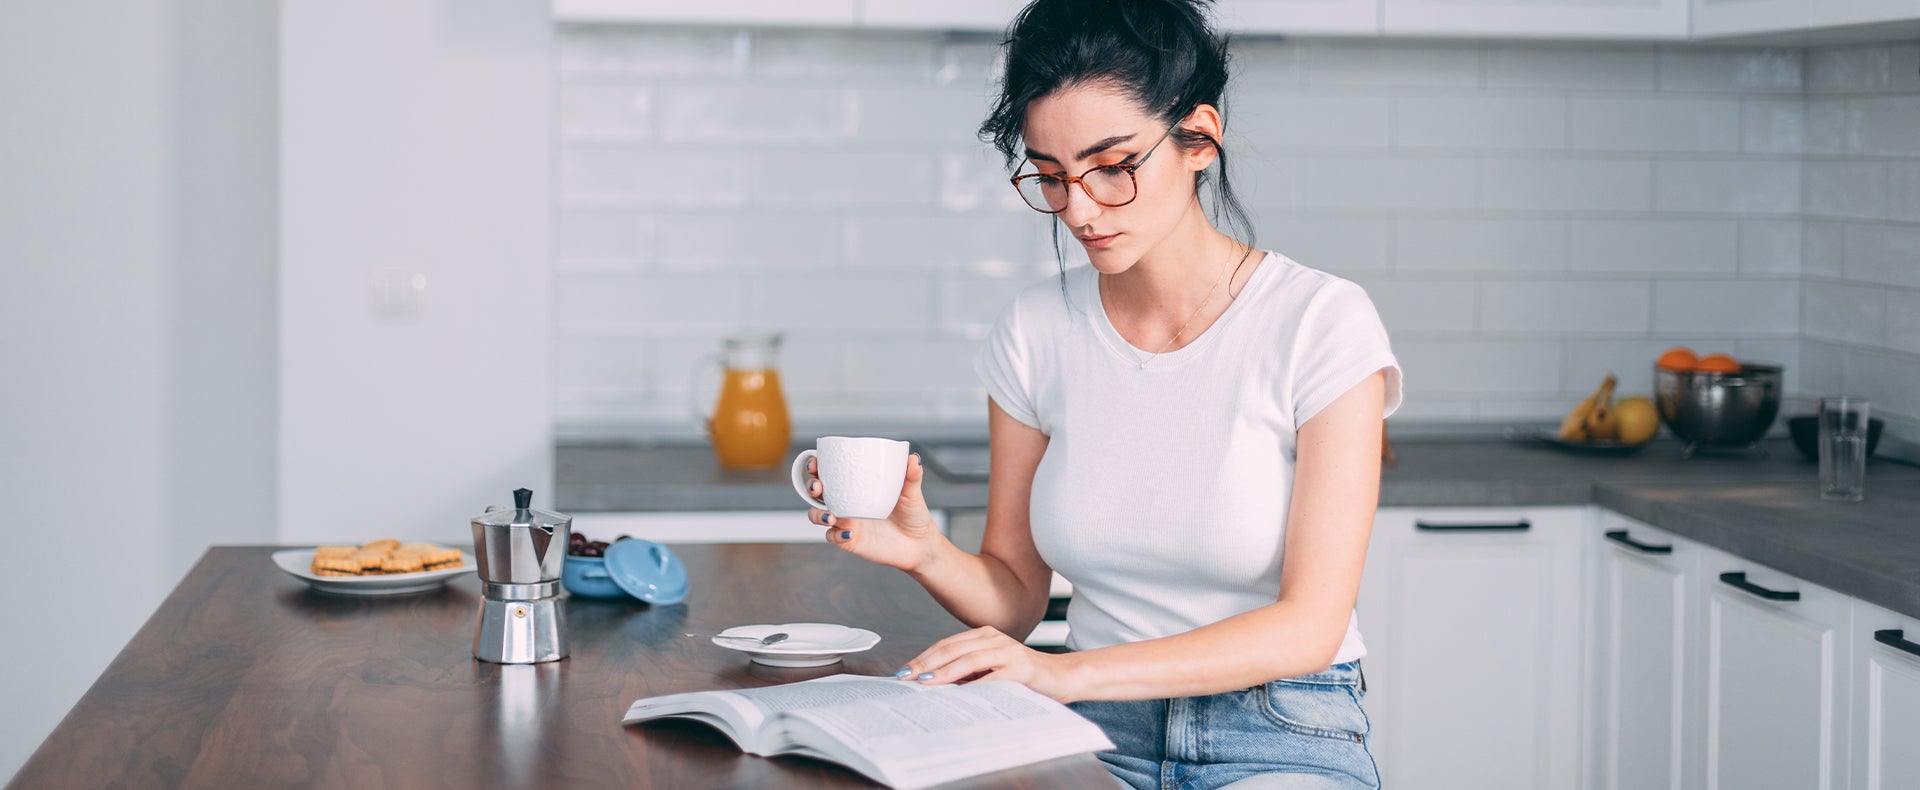 Woman drinking coffee and reading a book in the kitchen